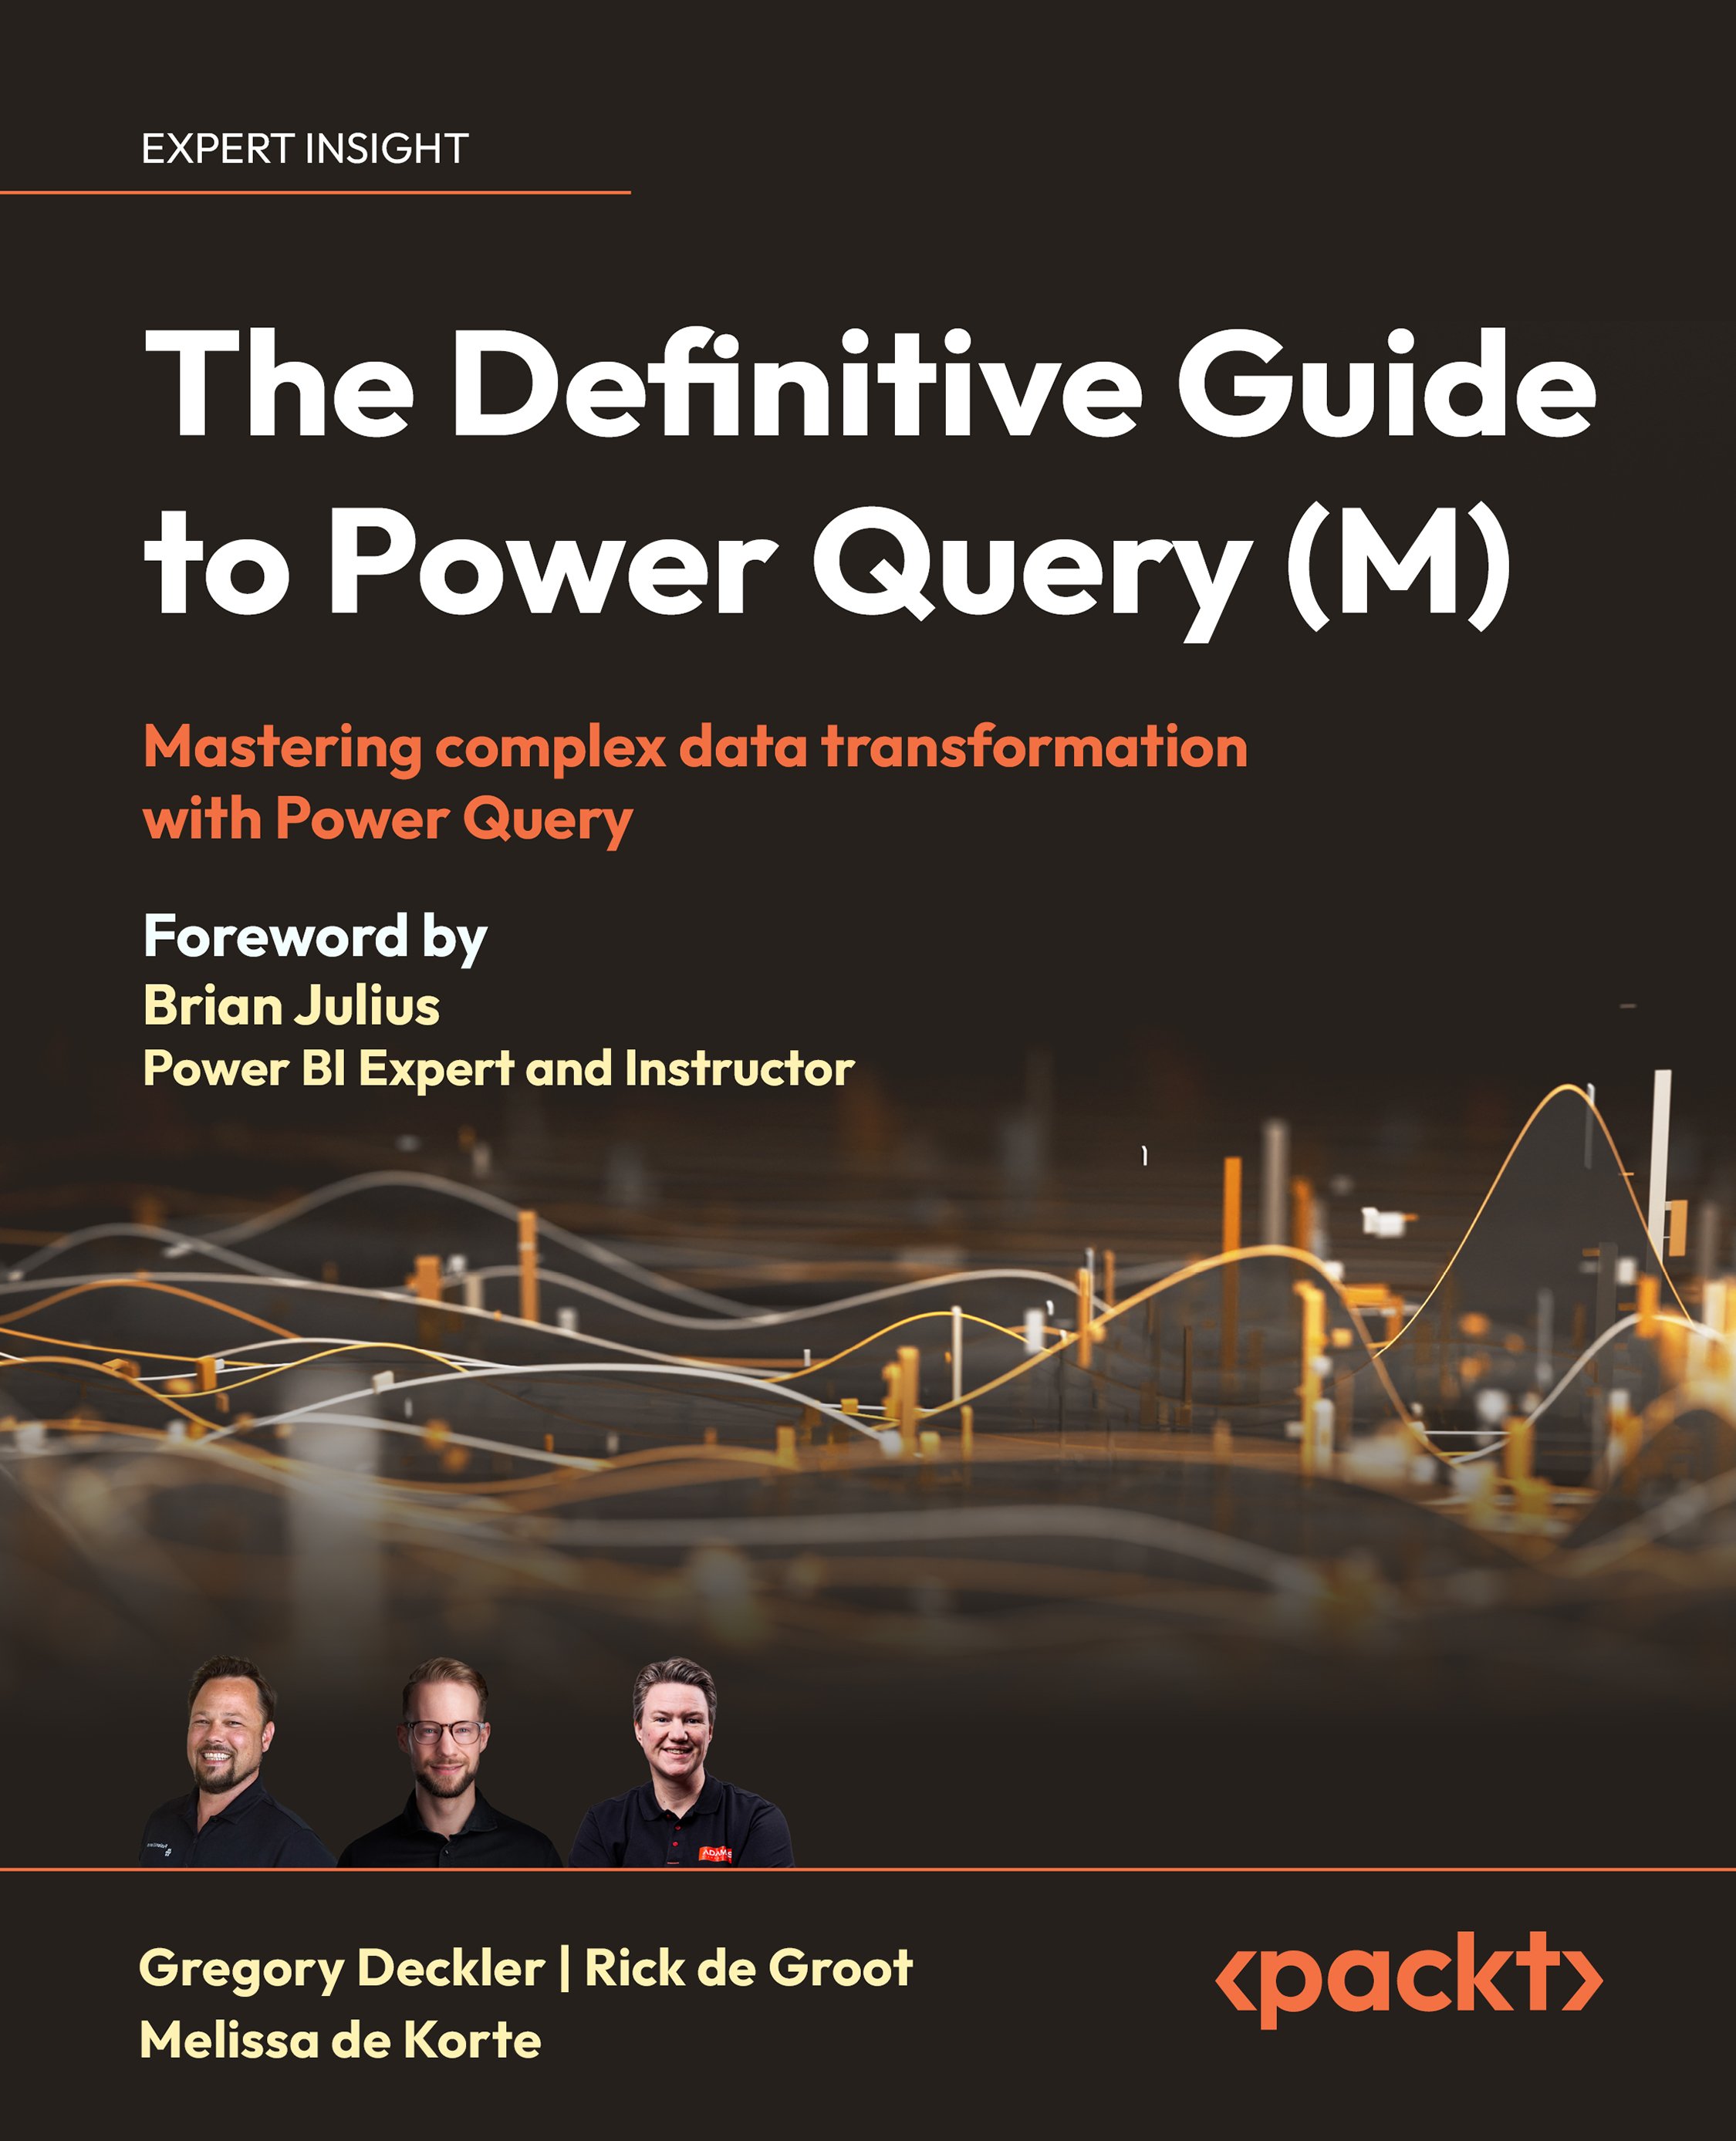 The Definitive Guide to Power Query (M): Mastering complex data transformation with Power Query